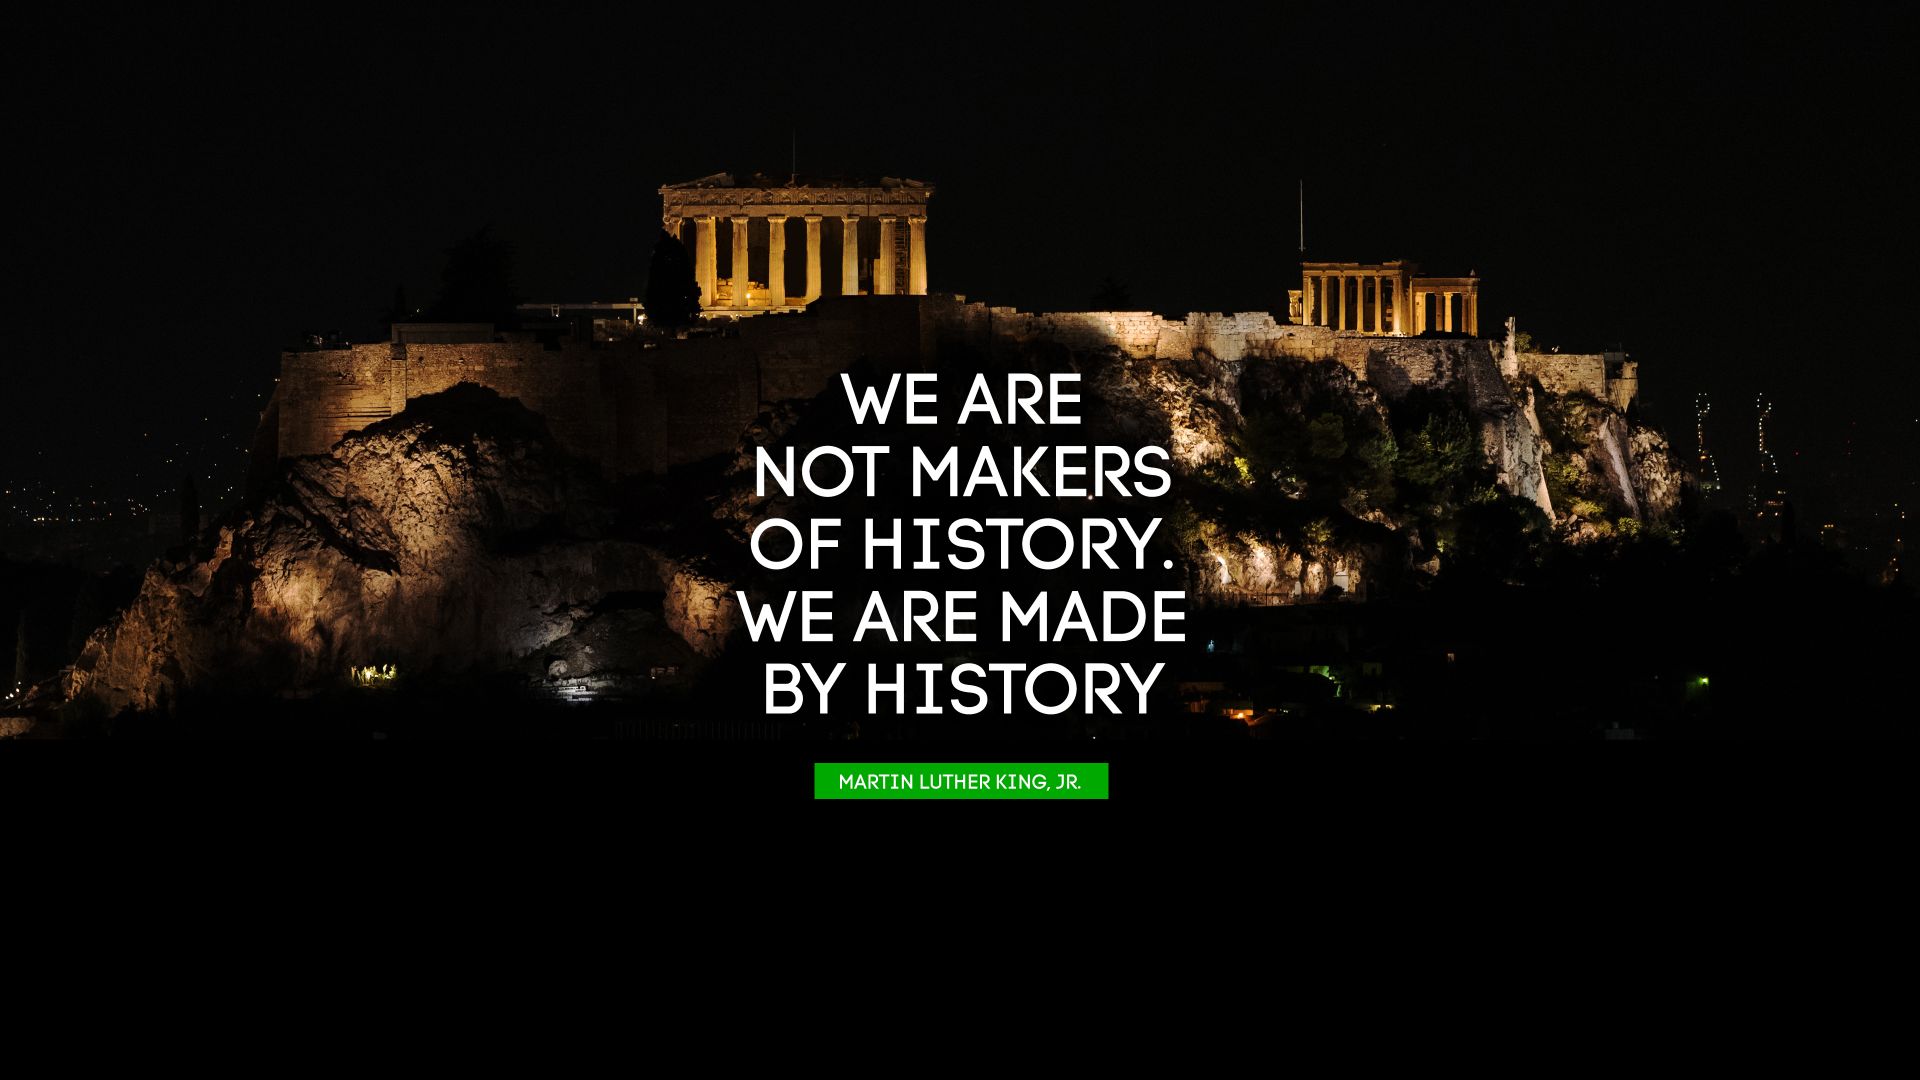 We are not makers of history. We are made by history. - Quote by Martin Luther King, Jr.